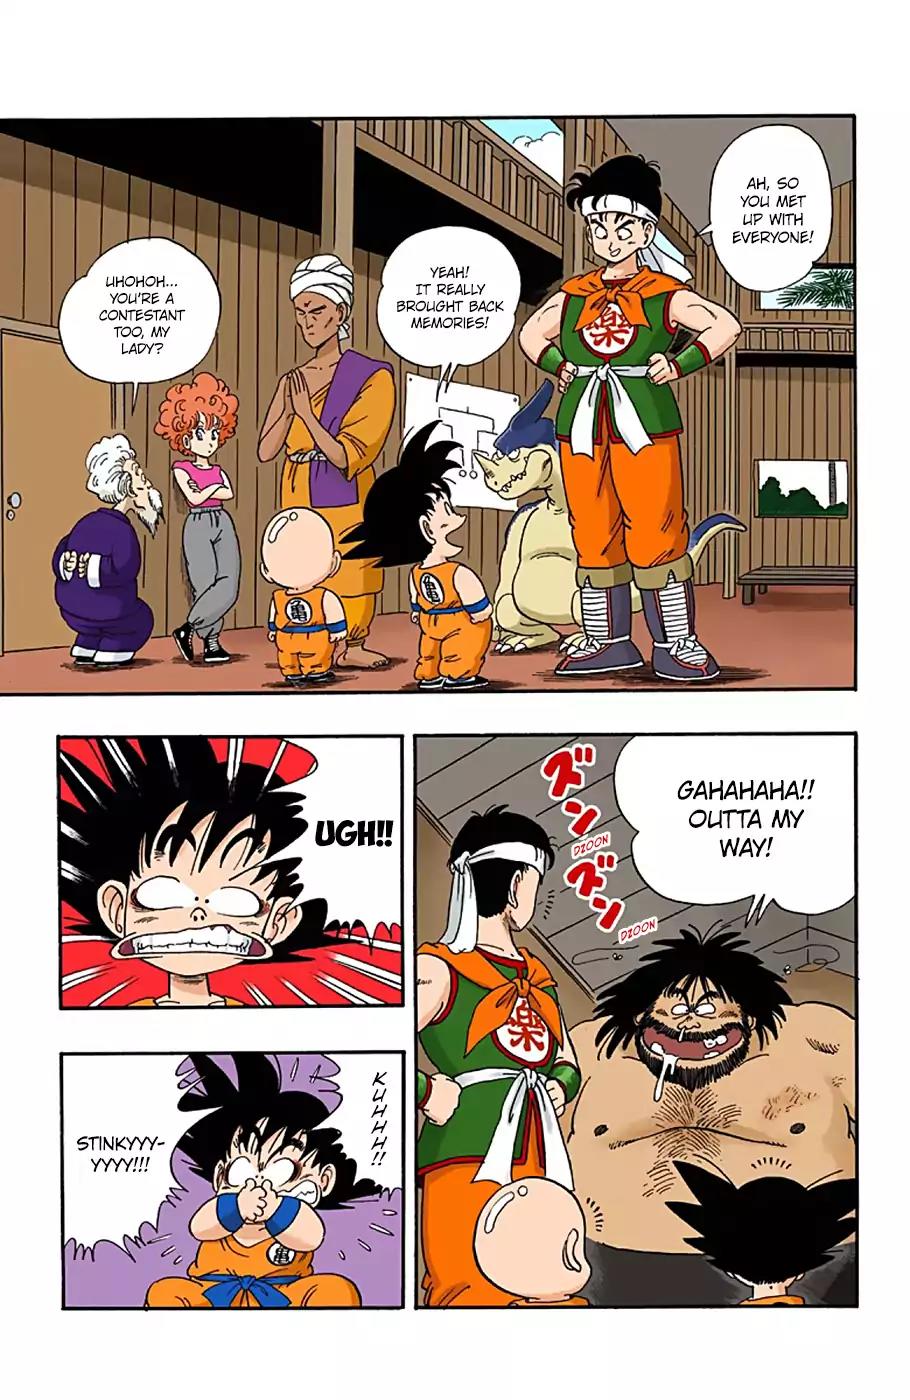 Dragon Ball - Full Color Vol.3 Chapter 35: